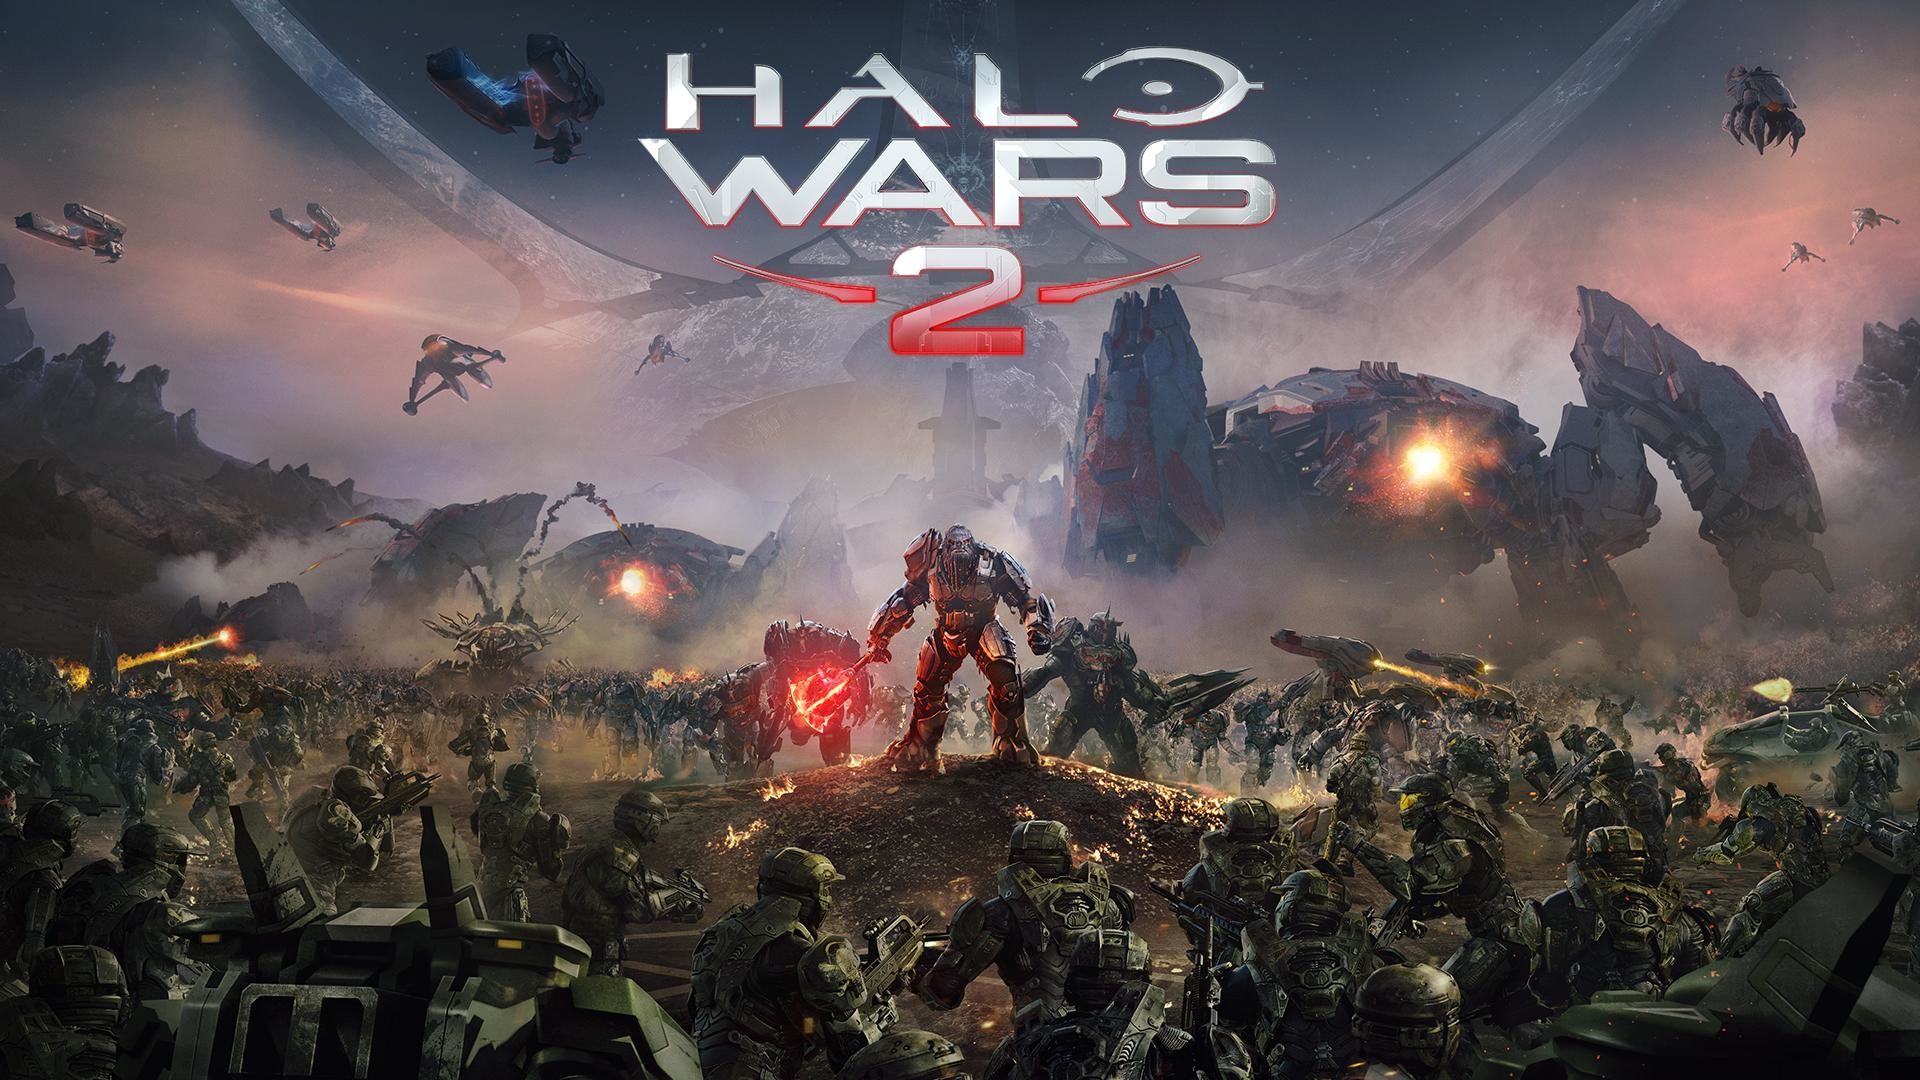 1920x1080 Halo Wars 2 Available February 21st On PC; Awesome Extras and System  Requirements Revealed | GeForce